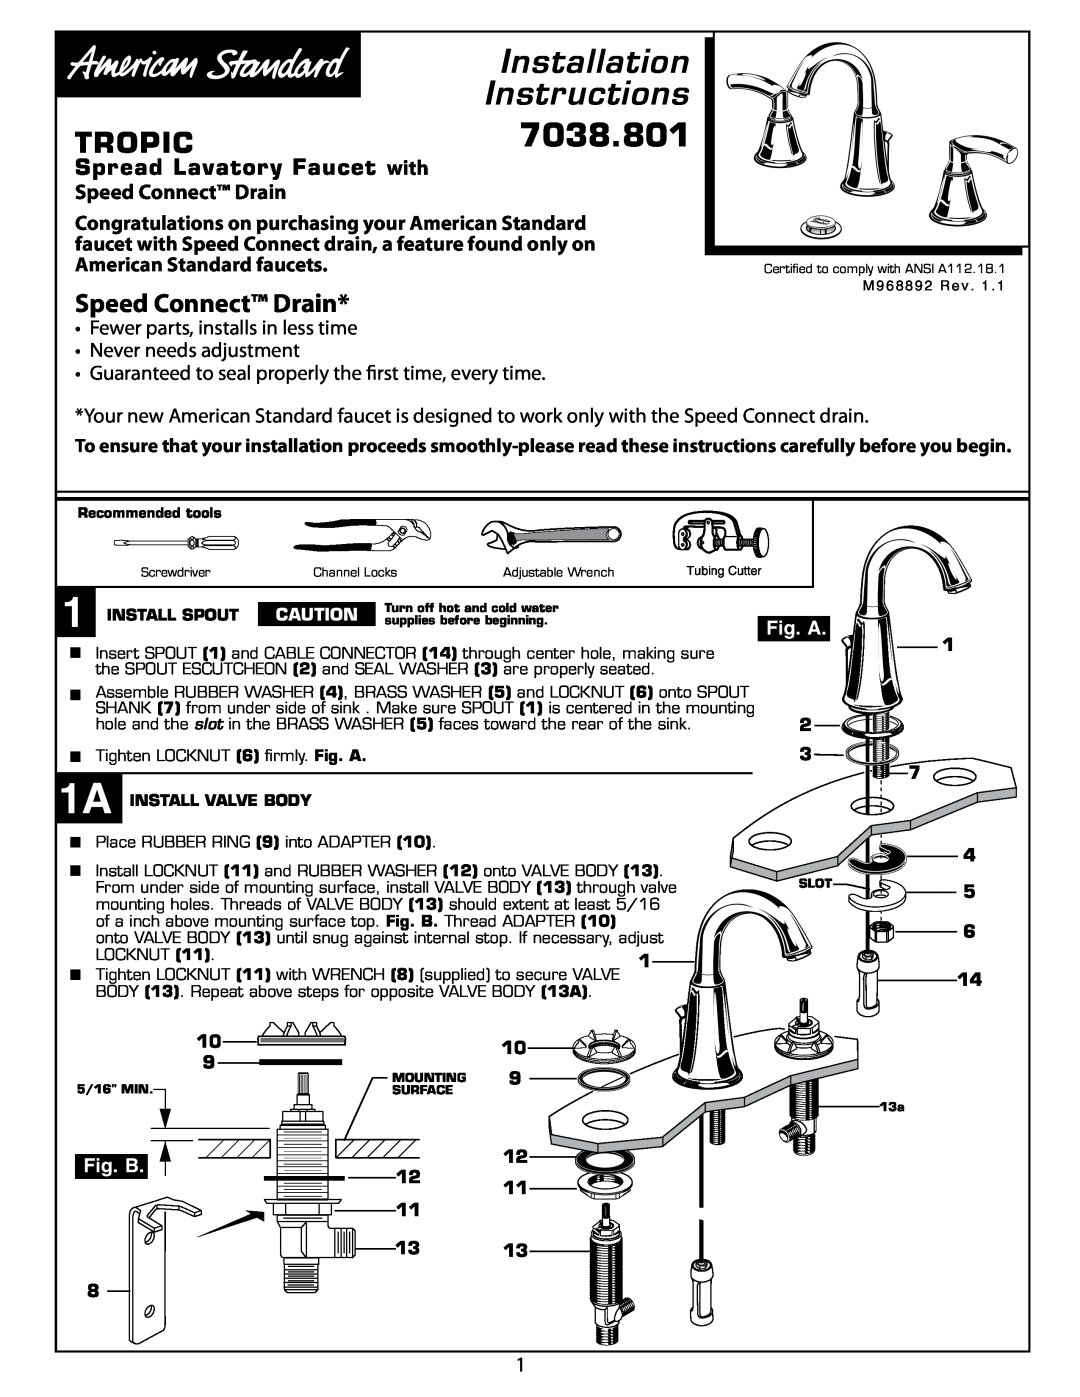 American Standard 7038.801 installation instructions Spread Lavatory Faucet with Speed Connect Drain, Fig. A, Fig. B 